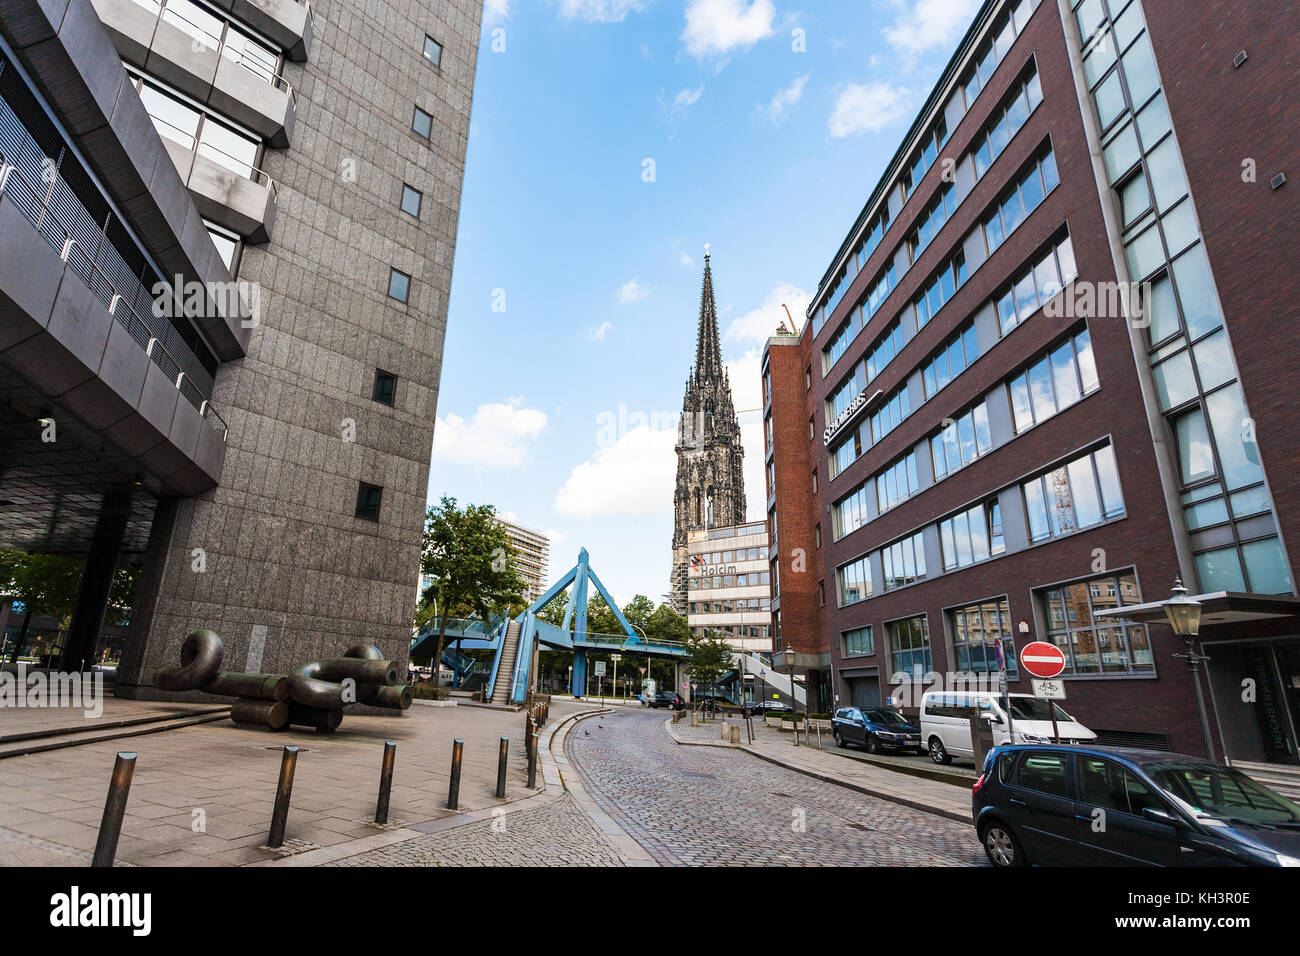 HAMBURG, GERMANY - SEPTEMBER 15, 2017: view of St Nicholas church from Deichstrasse. The church was the tallest building in the world in 1874-1876, an Stock Photo